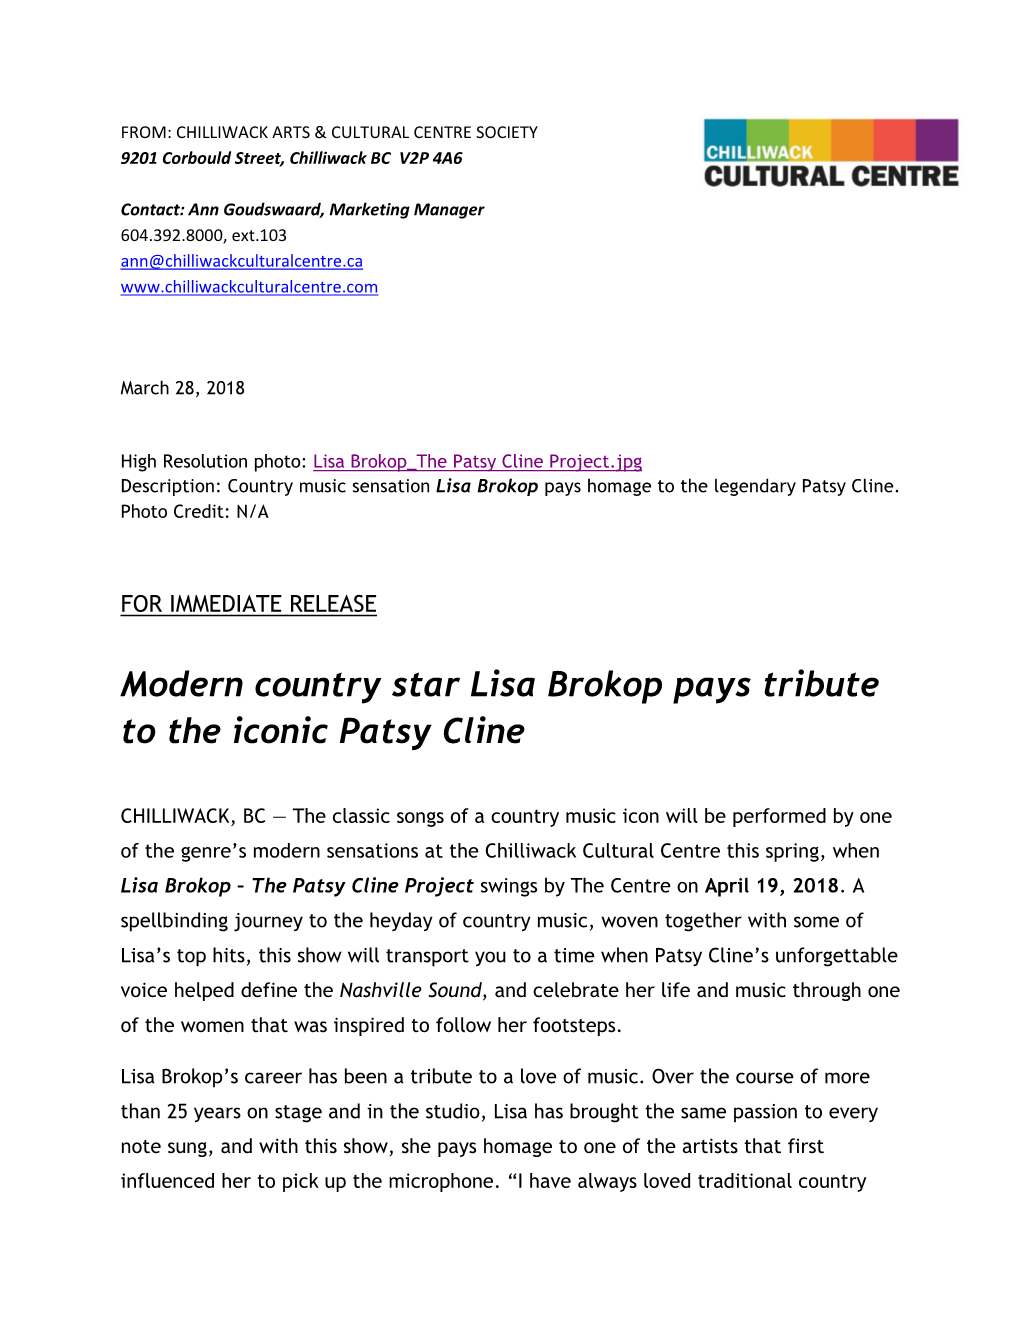 Lisa Brokop – the Patsy Cline Project Swings by the Centre on April 19, 2018